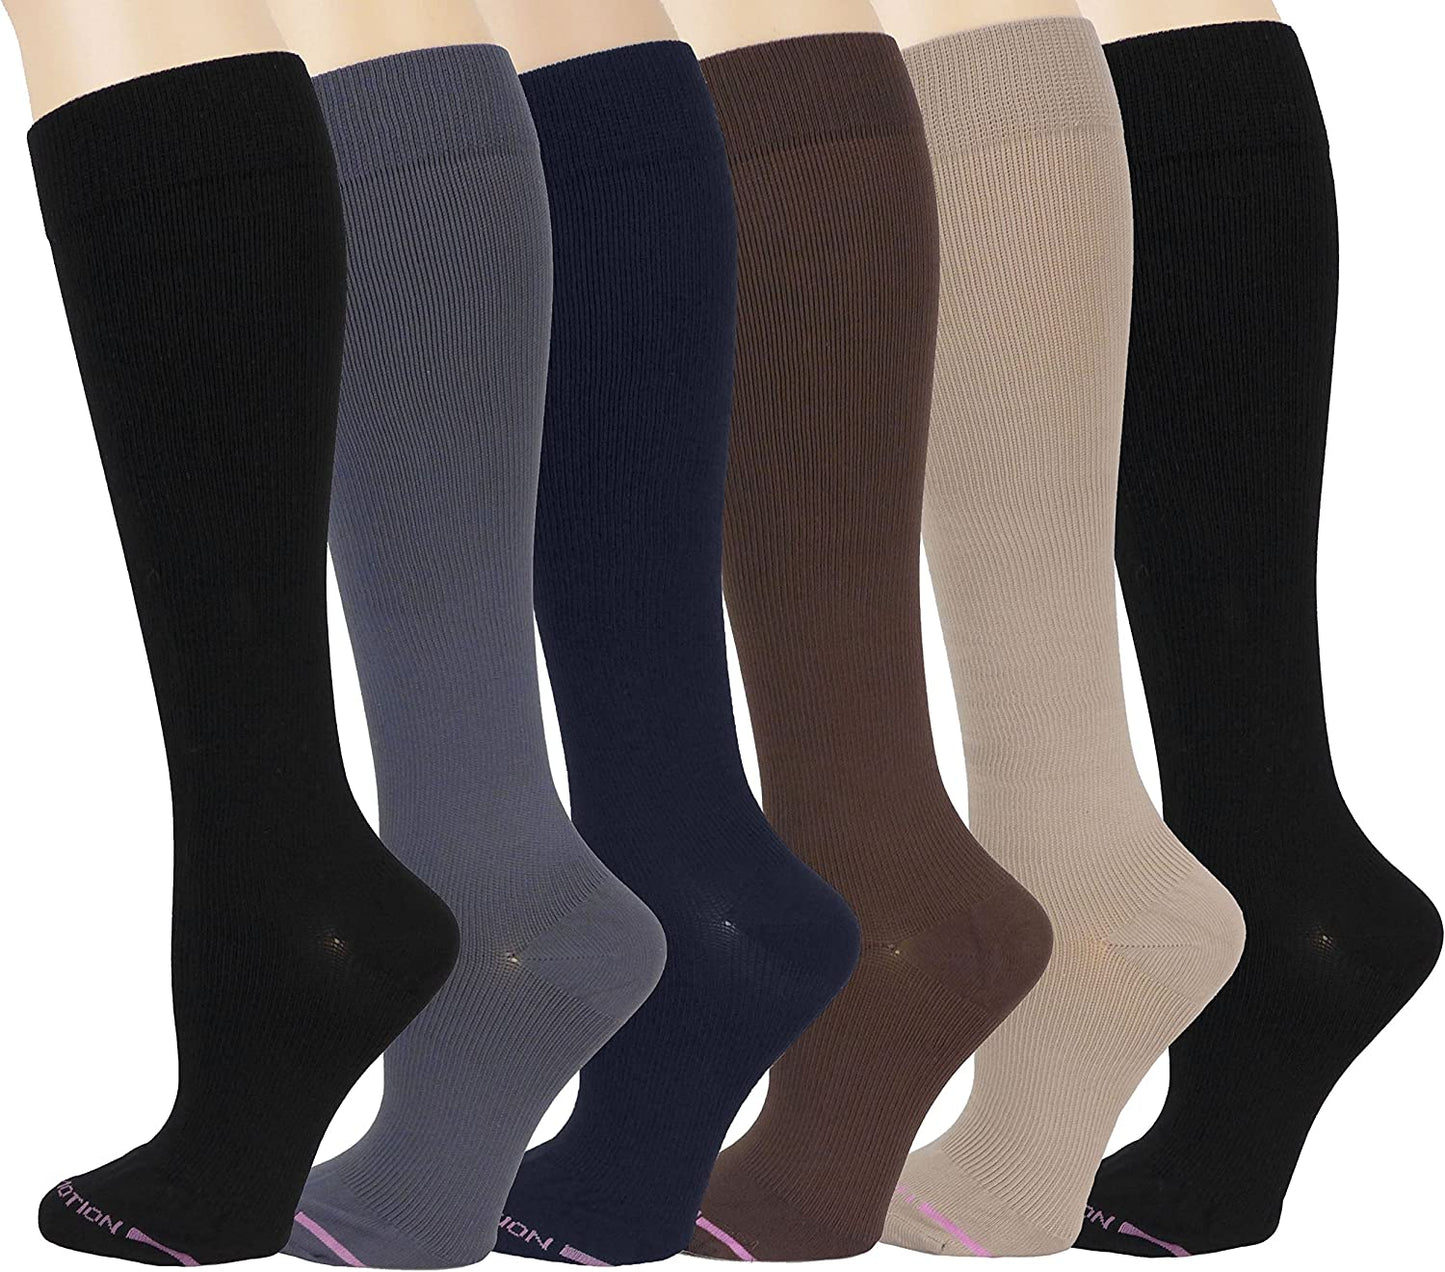 Dr Motion Knee High Compression Socks for Women | Assorted Solid color (6 Pairs)